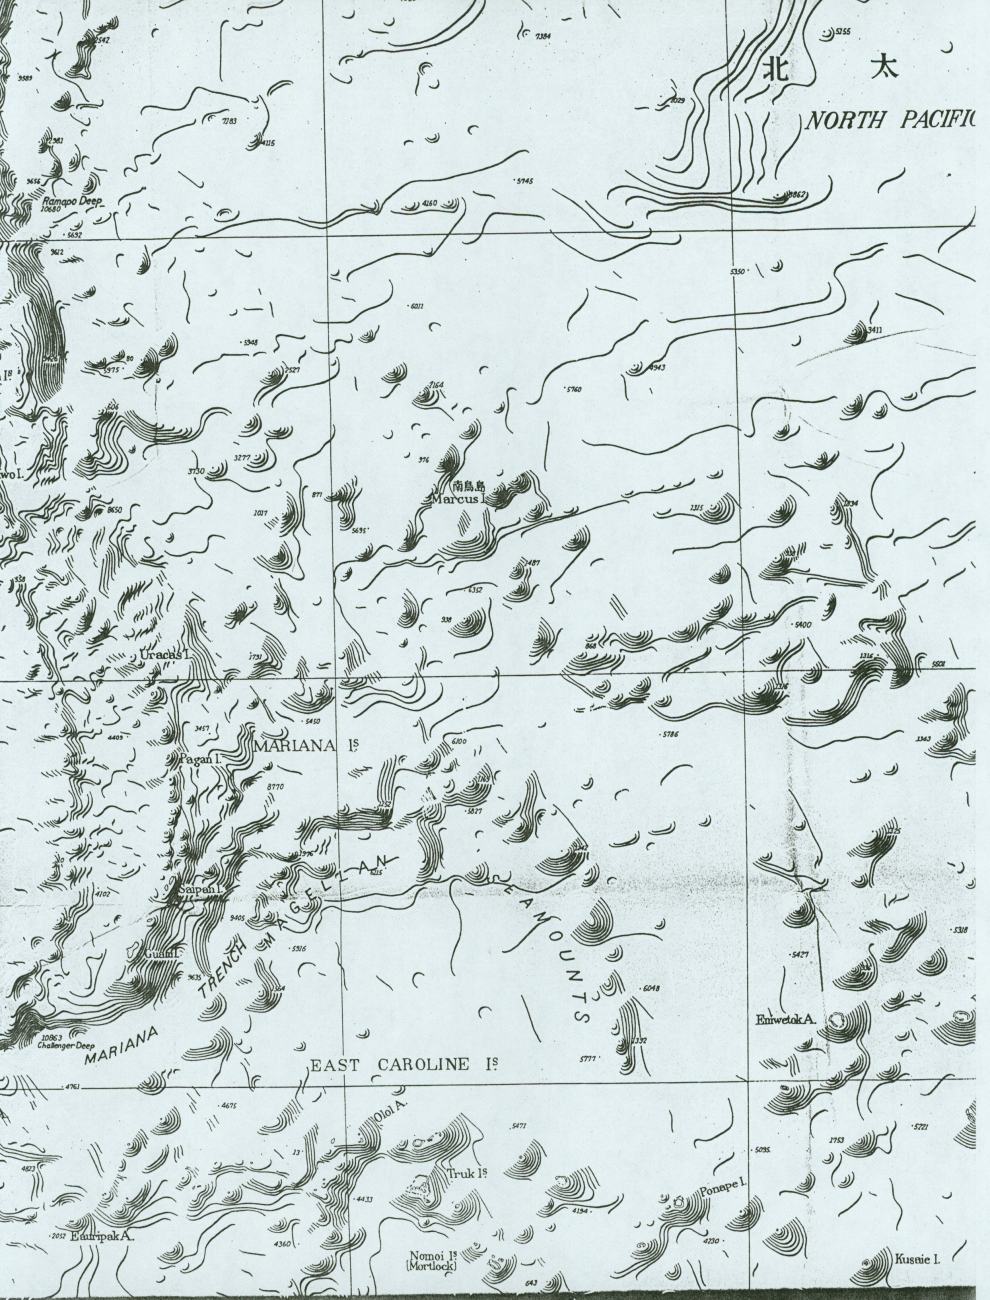 Section of Bathymetric Chart of the Northwest Pacific showingarea aound Magellan Seamounts